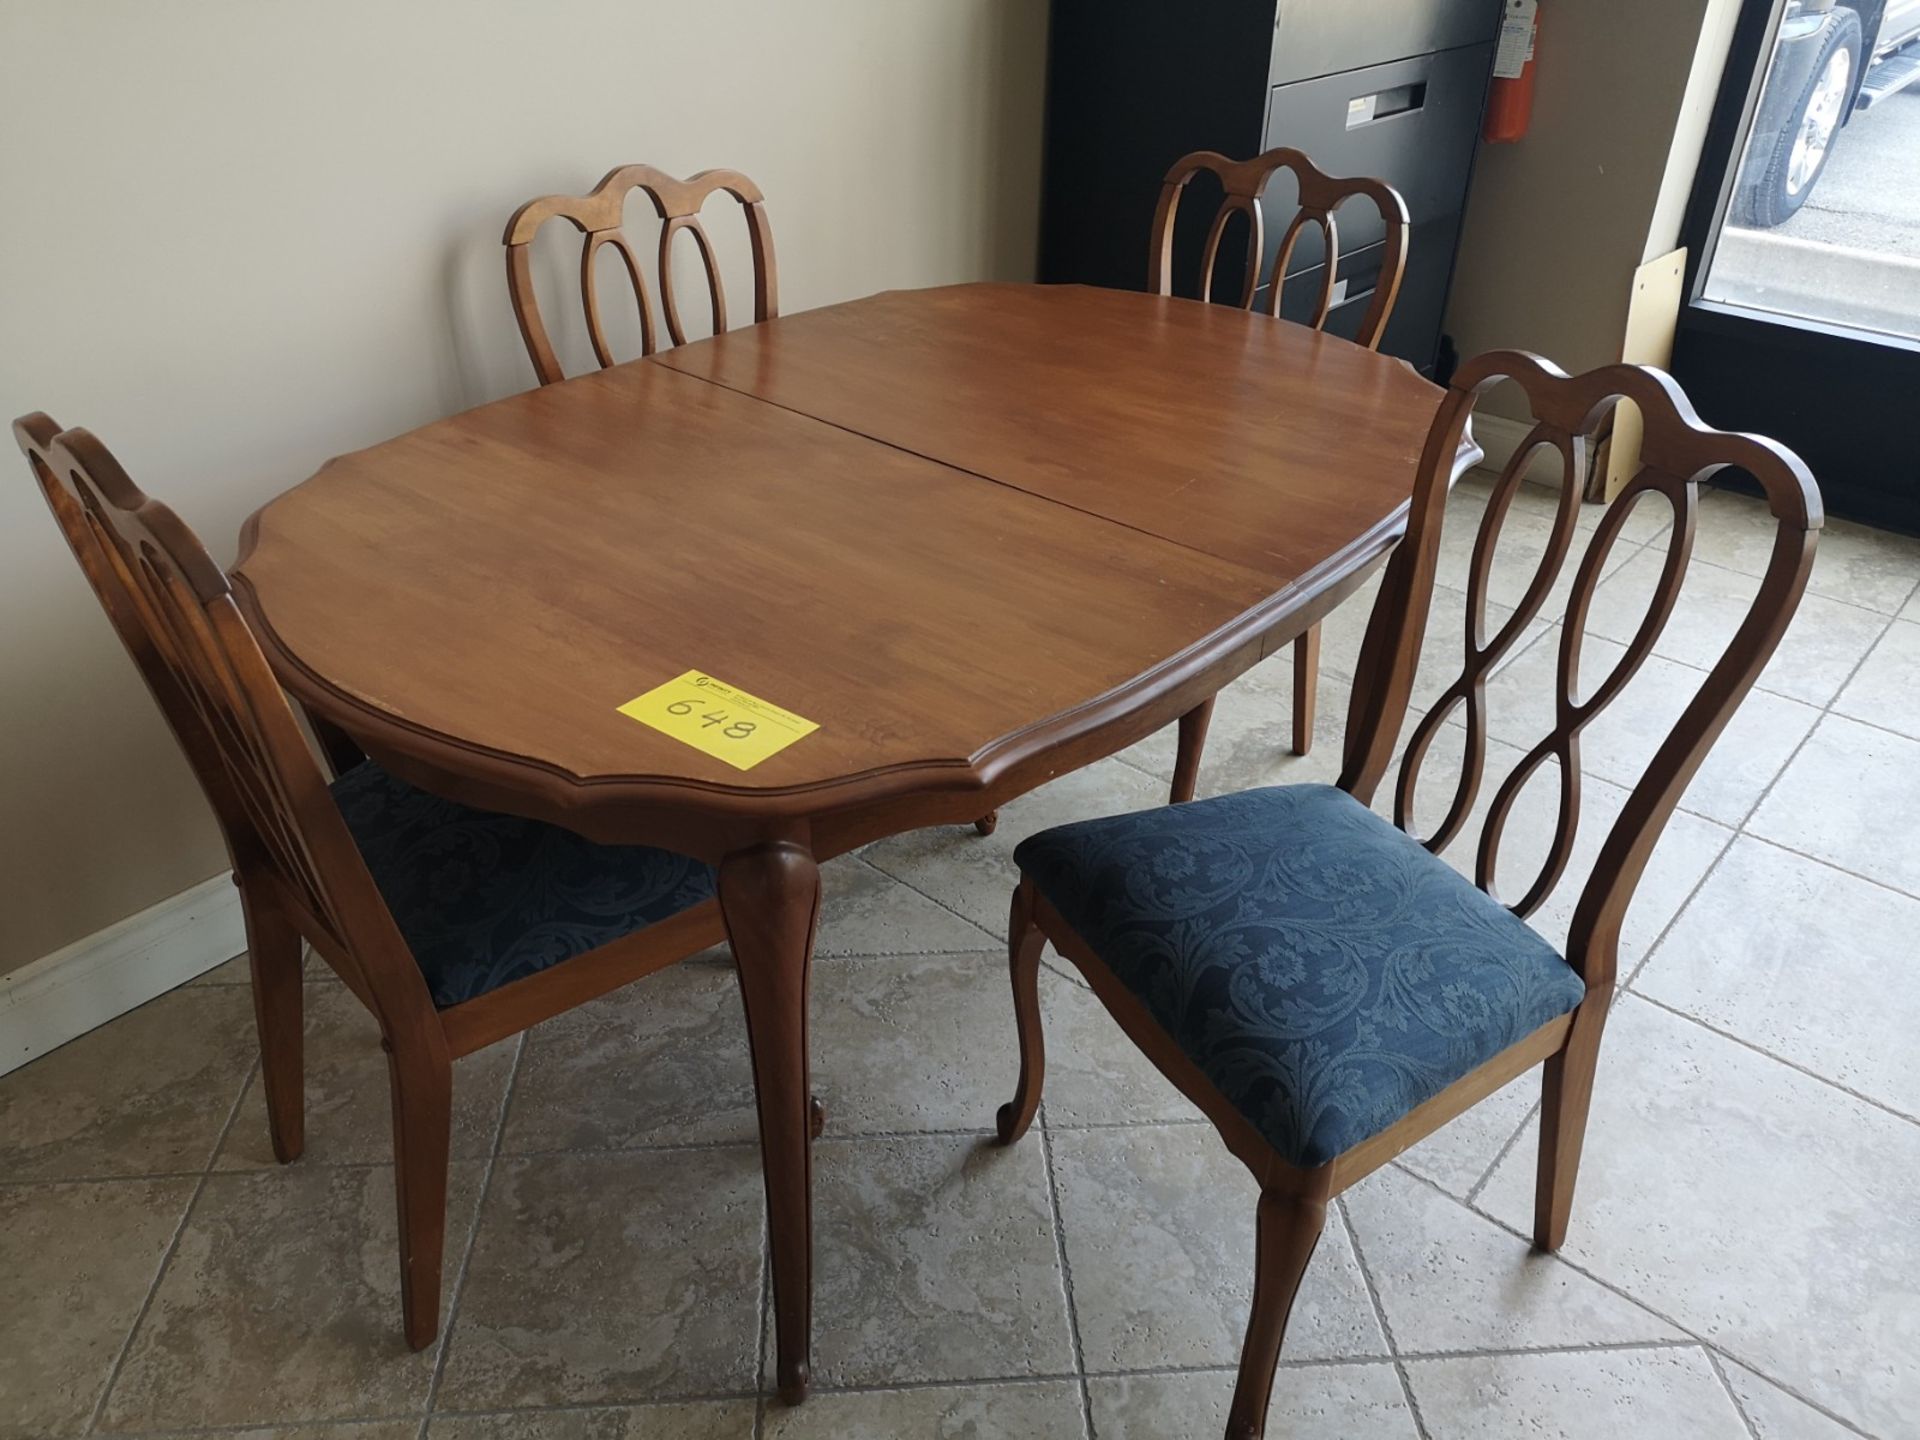 DININGROOM TABLE W/ (4) CHAIRS